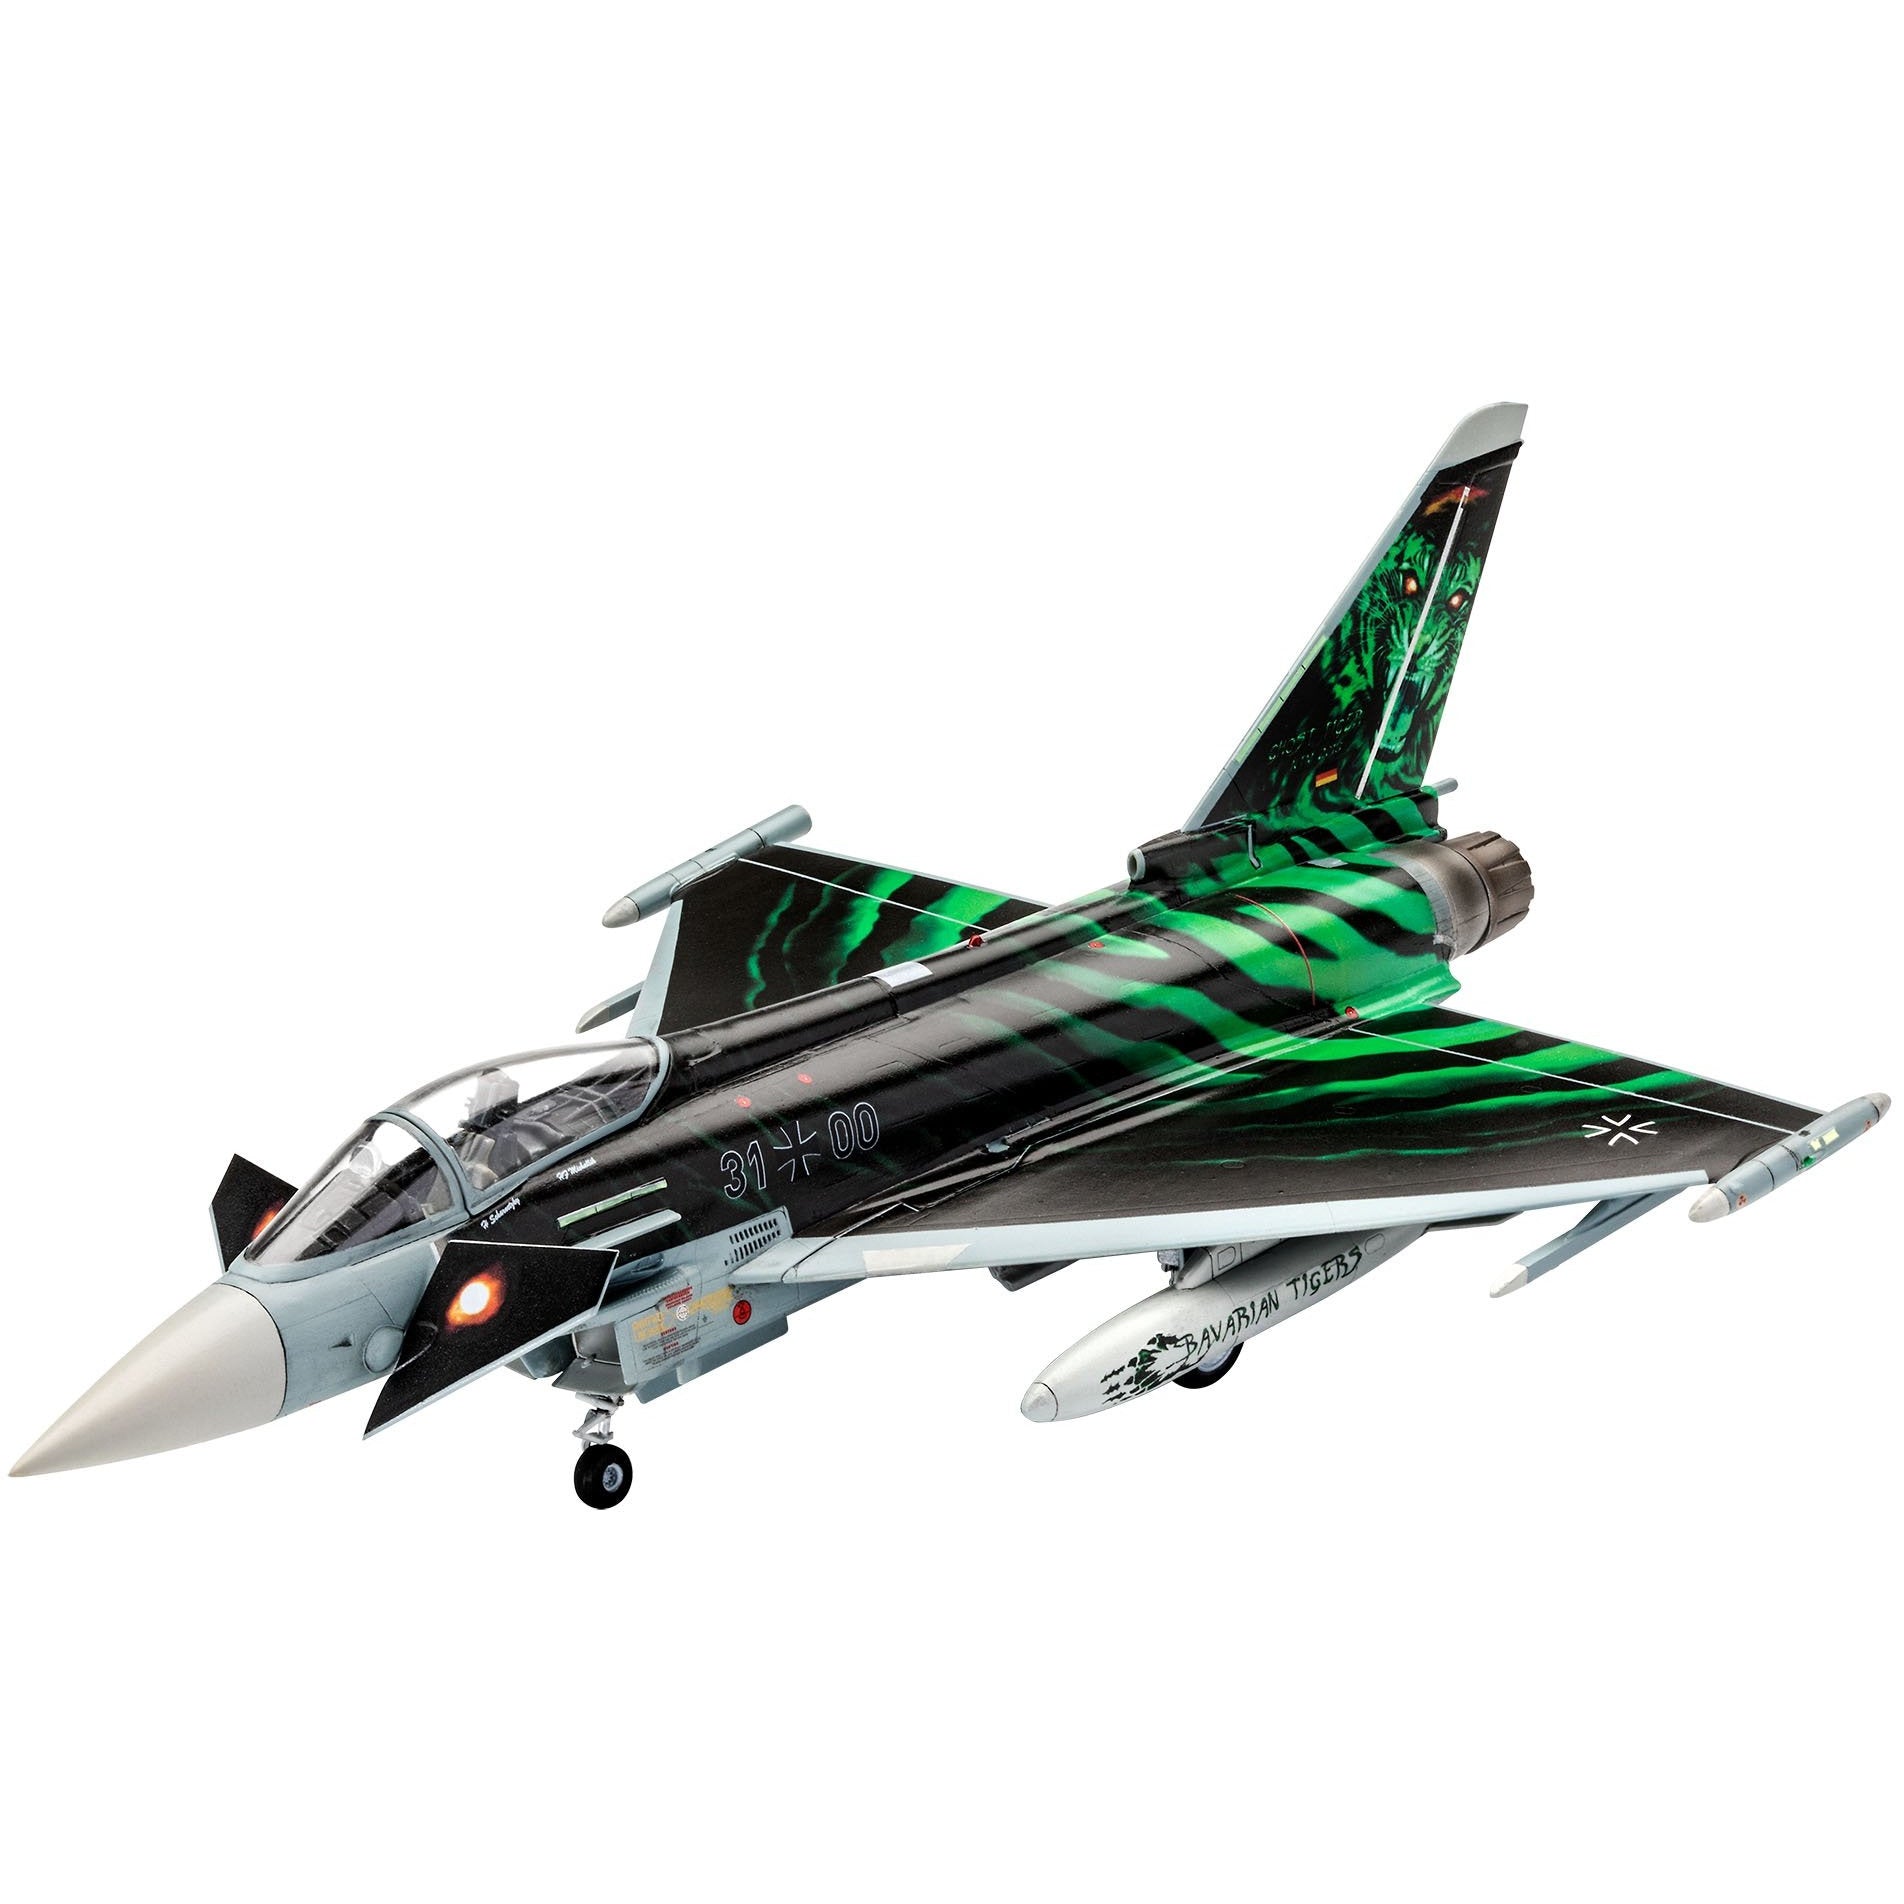 Eurofighter Typhoon Ghost Tiger 1/72 by Revell